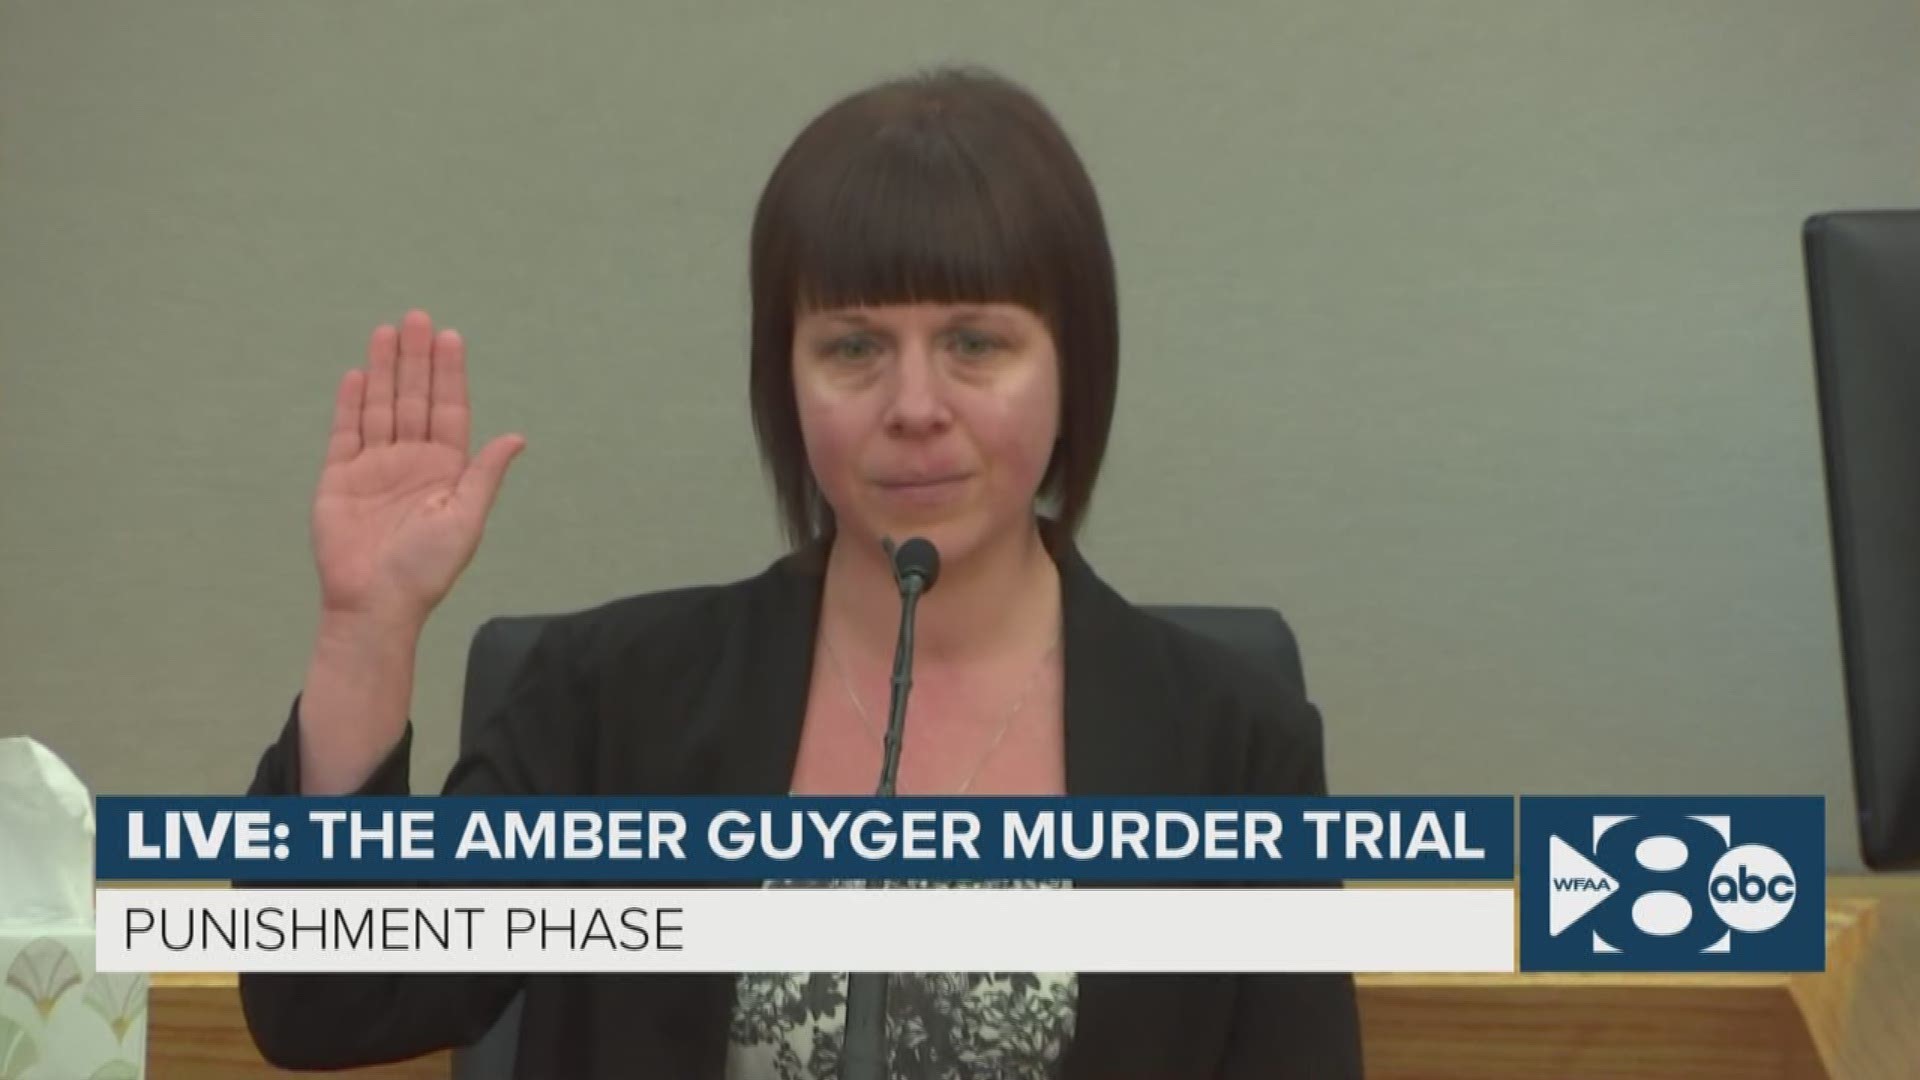 Alana Guyger, Amber Guyger's sister, took the stand Wednesday during the punishment phase of the trial.